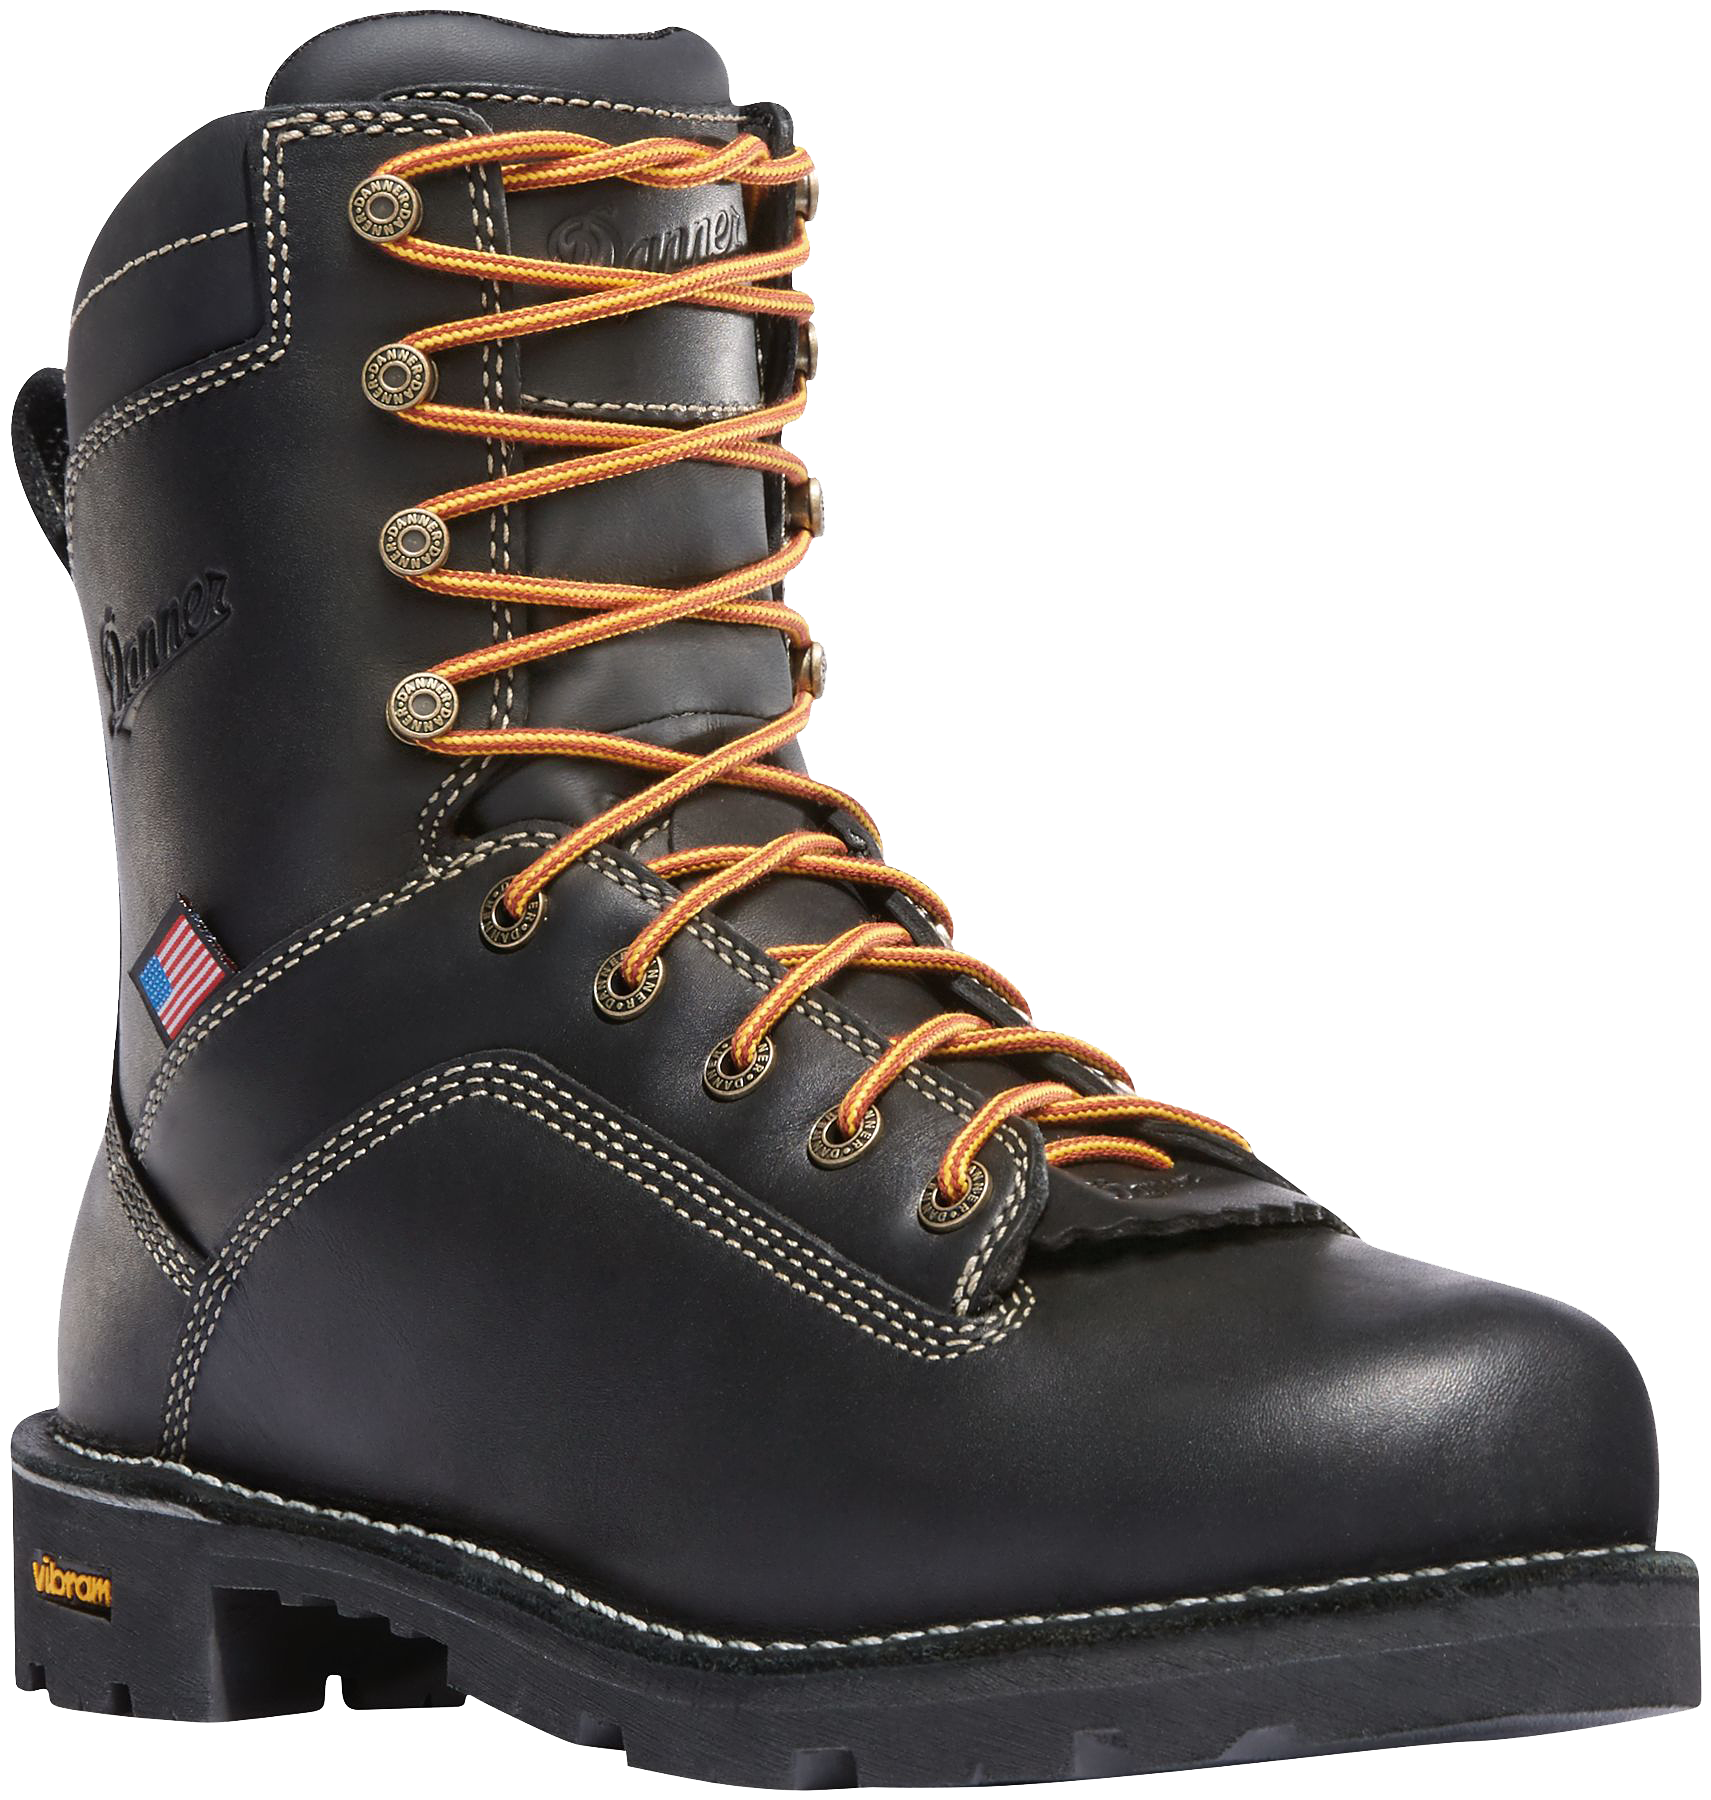 Danner Quarry USA Brown GORE-TEX Alloy Toe Work Boots for Men - Black - 10W